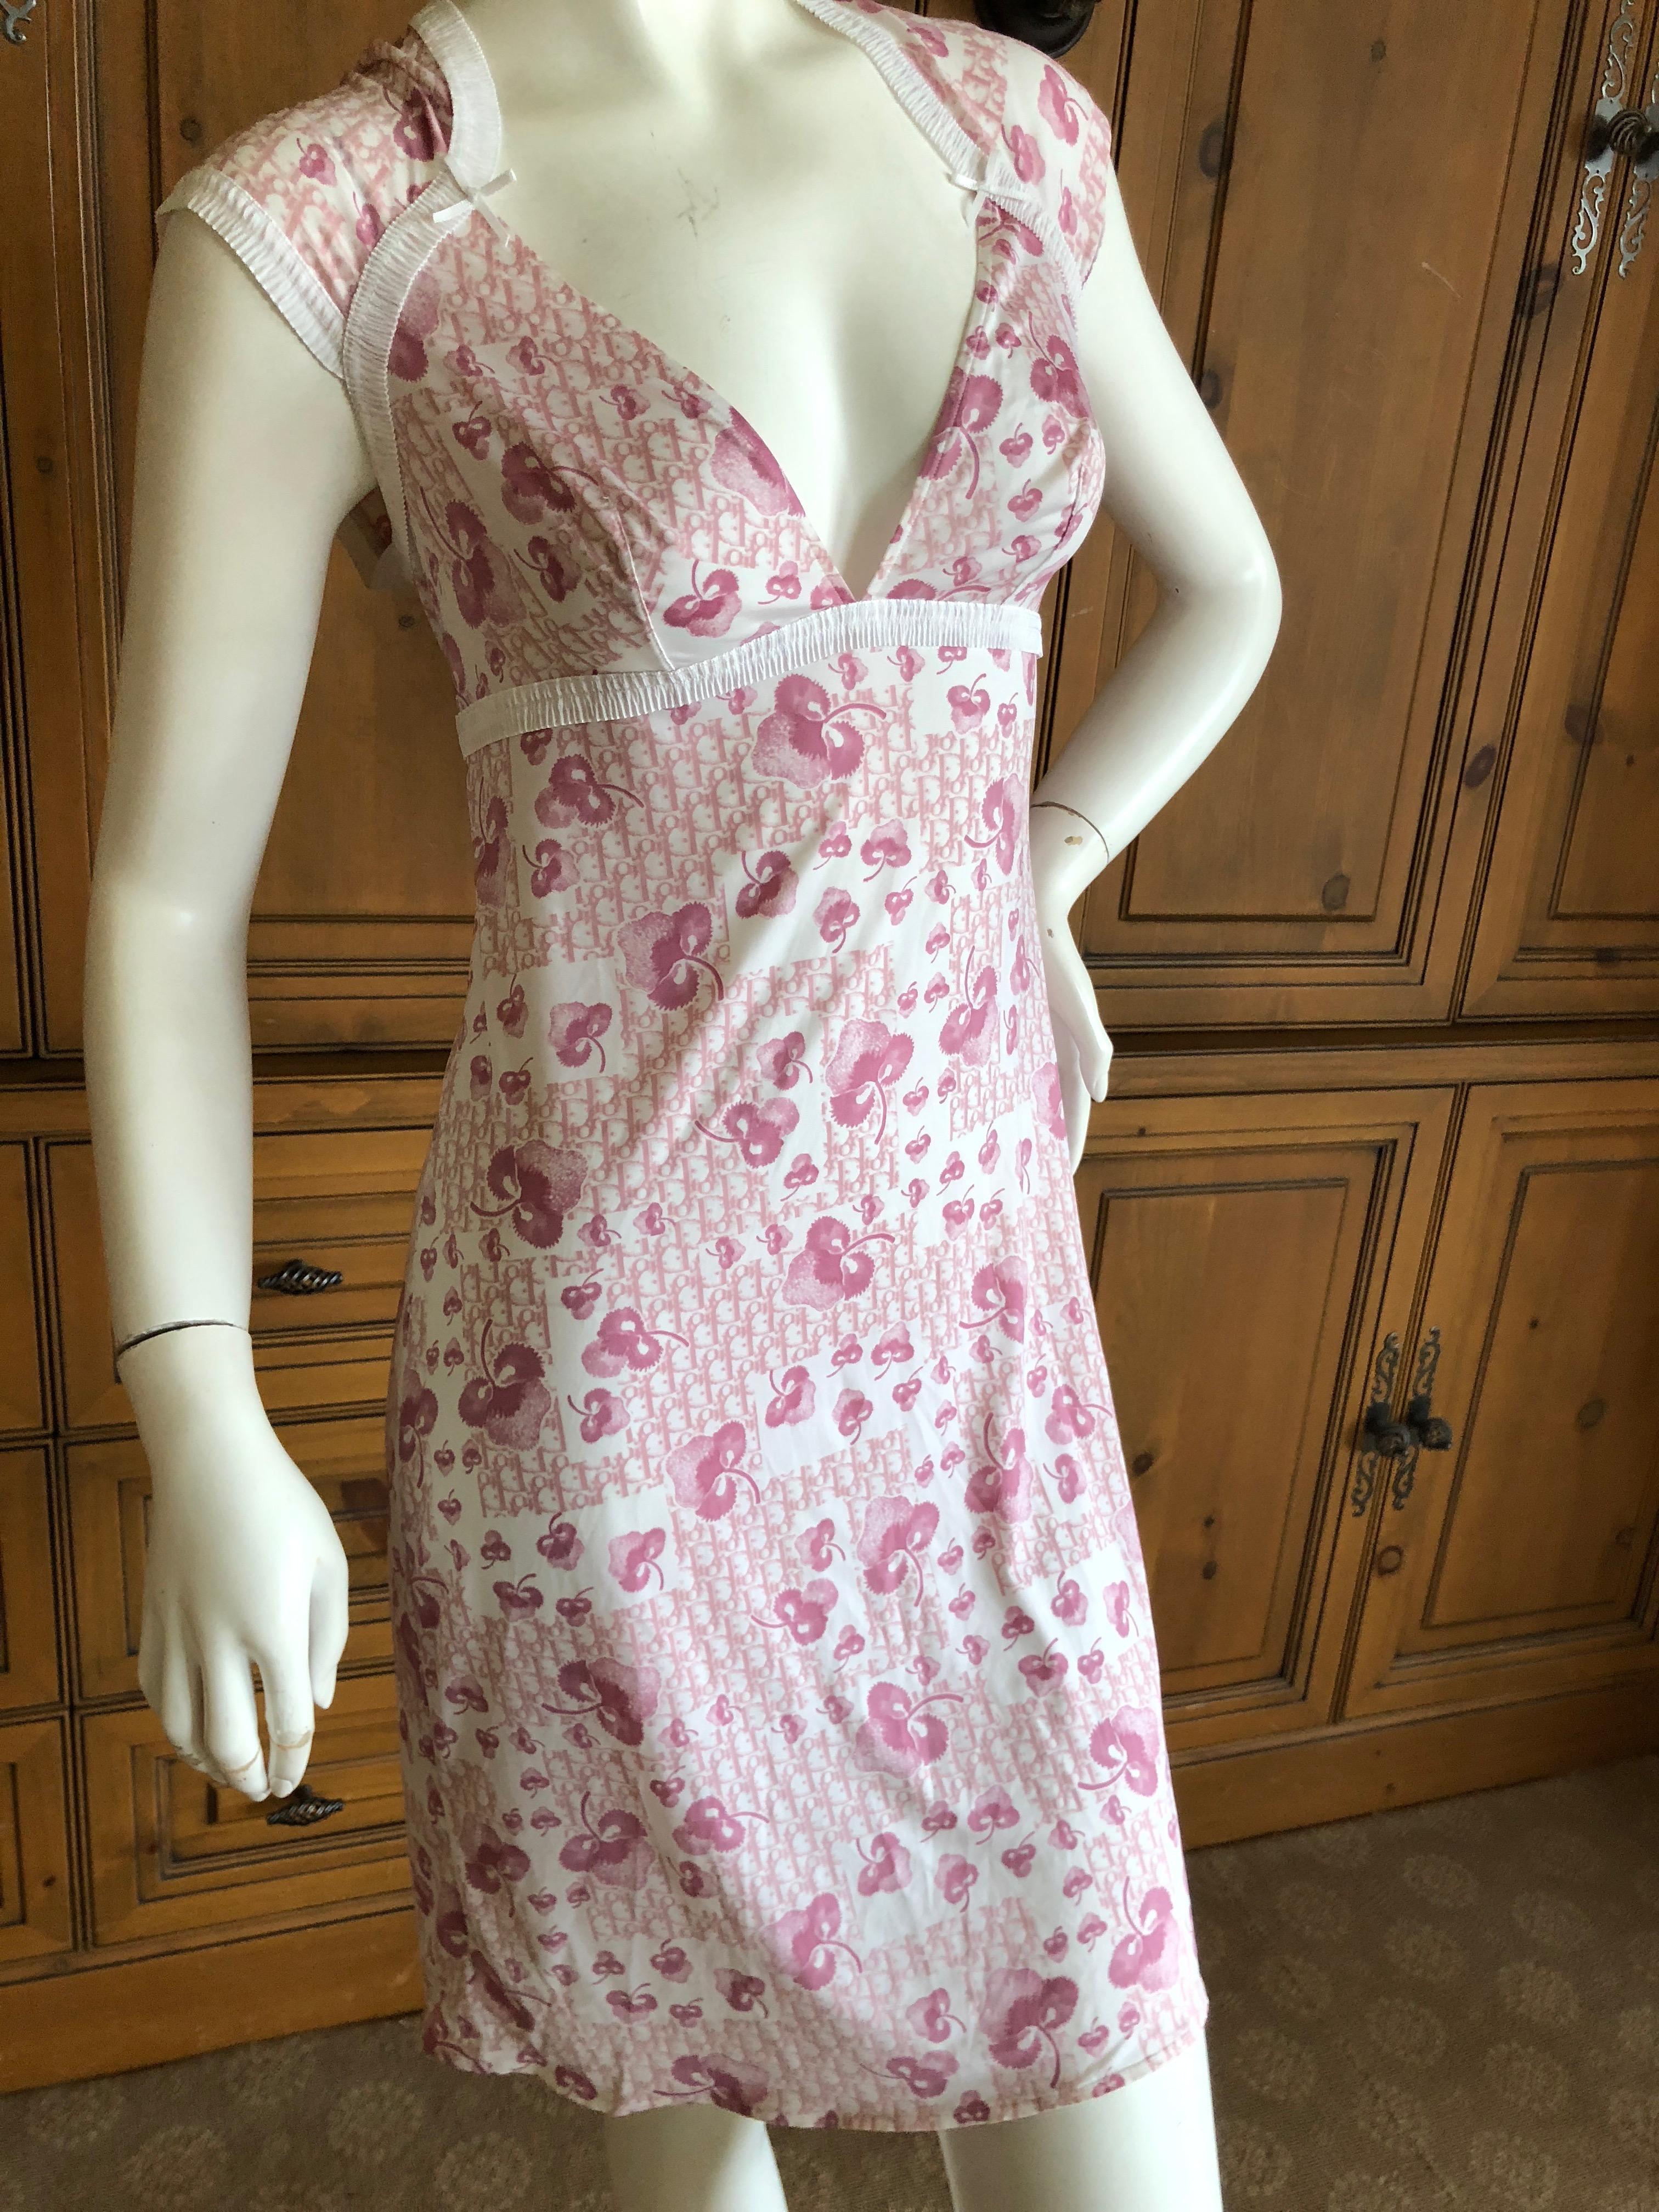 Christian Dior Intimates Lingerie by John Galliano Cherry Blossom Pattern Logo Dress
This is a wonderful lightweight dress, from the intimates collection, not boutique line.
Size 36
Bust 36